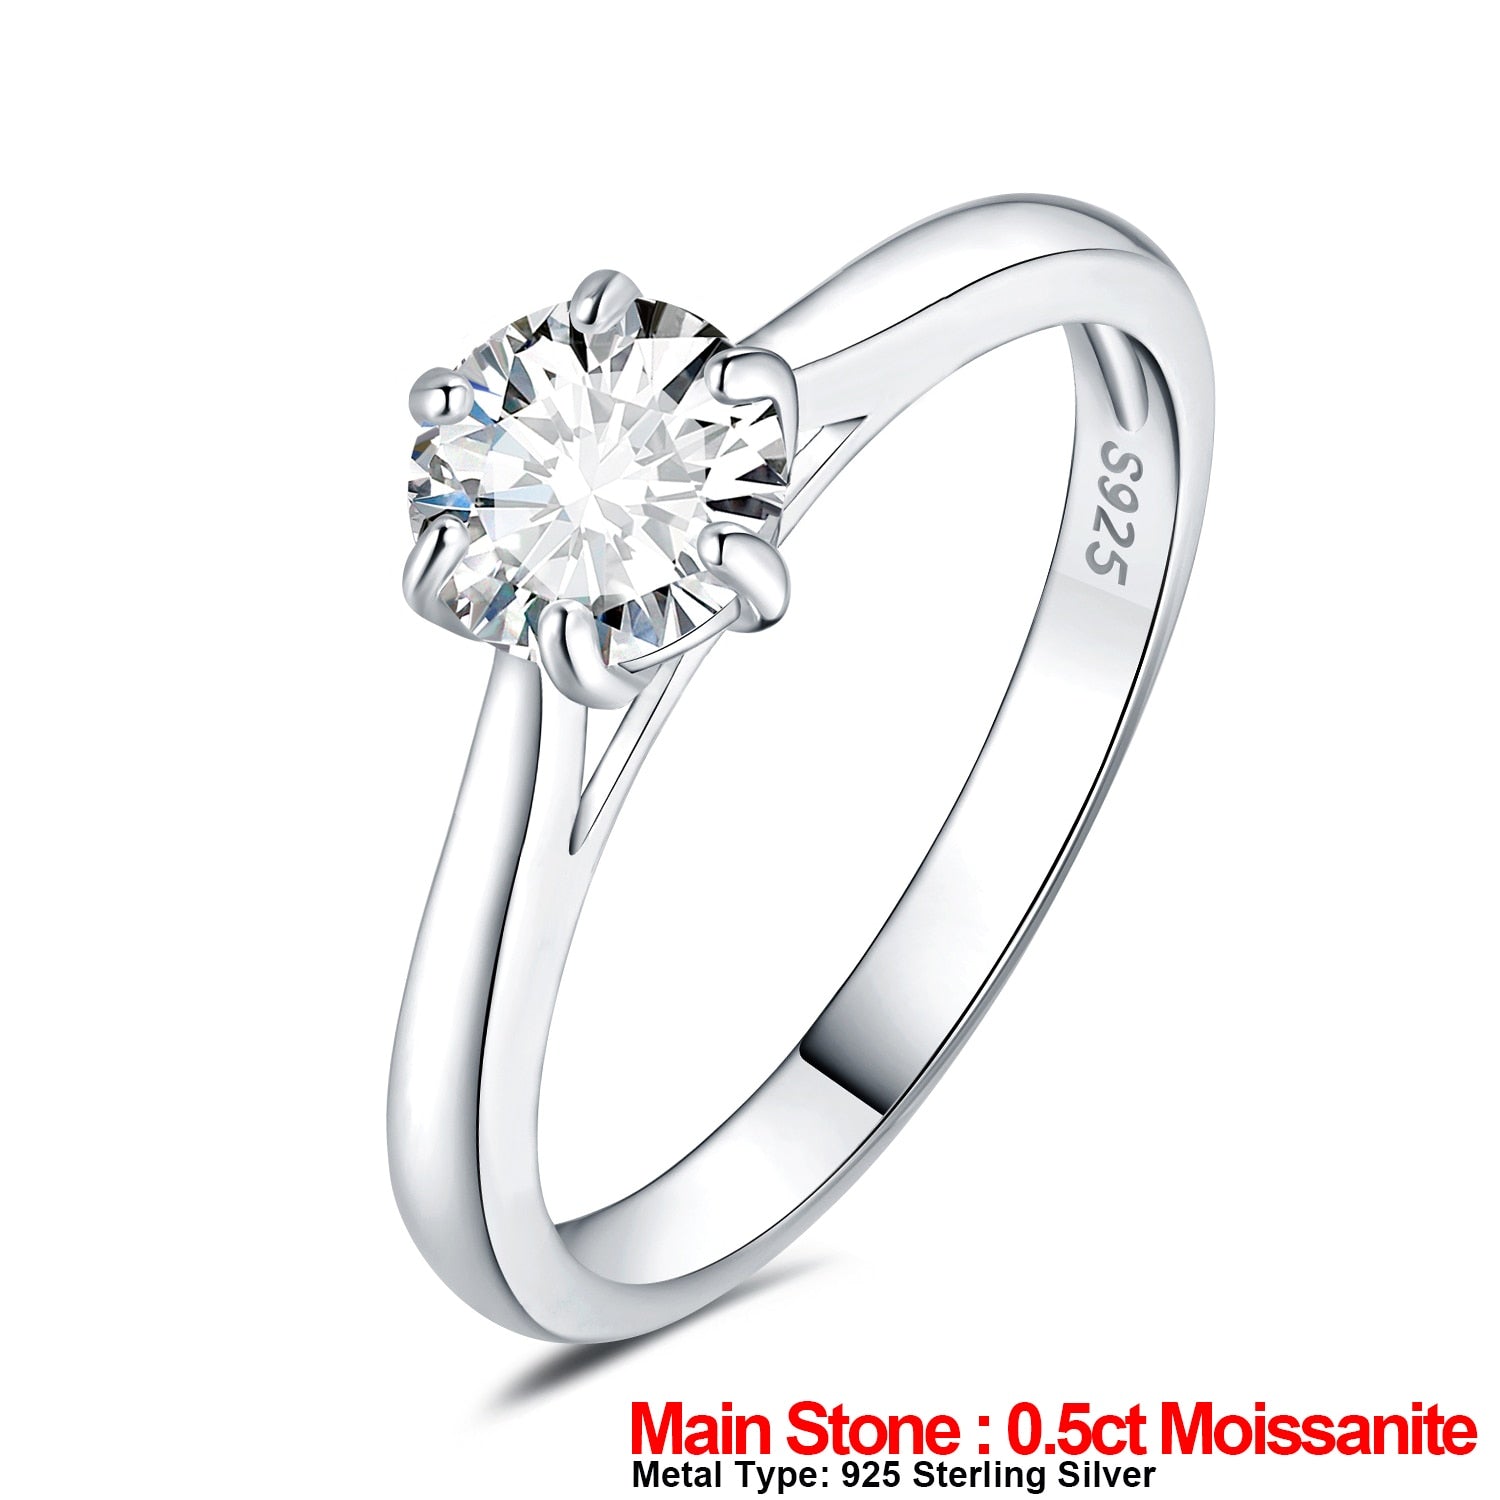 JewelryPalace Moissanite D Color 0.5ct 1ct 1.5ct 2ct Round Cut S925 Sterling Silver Solitaire Wedding Engagement Ring for Women